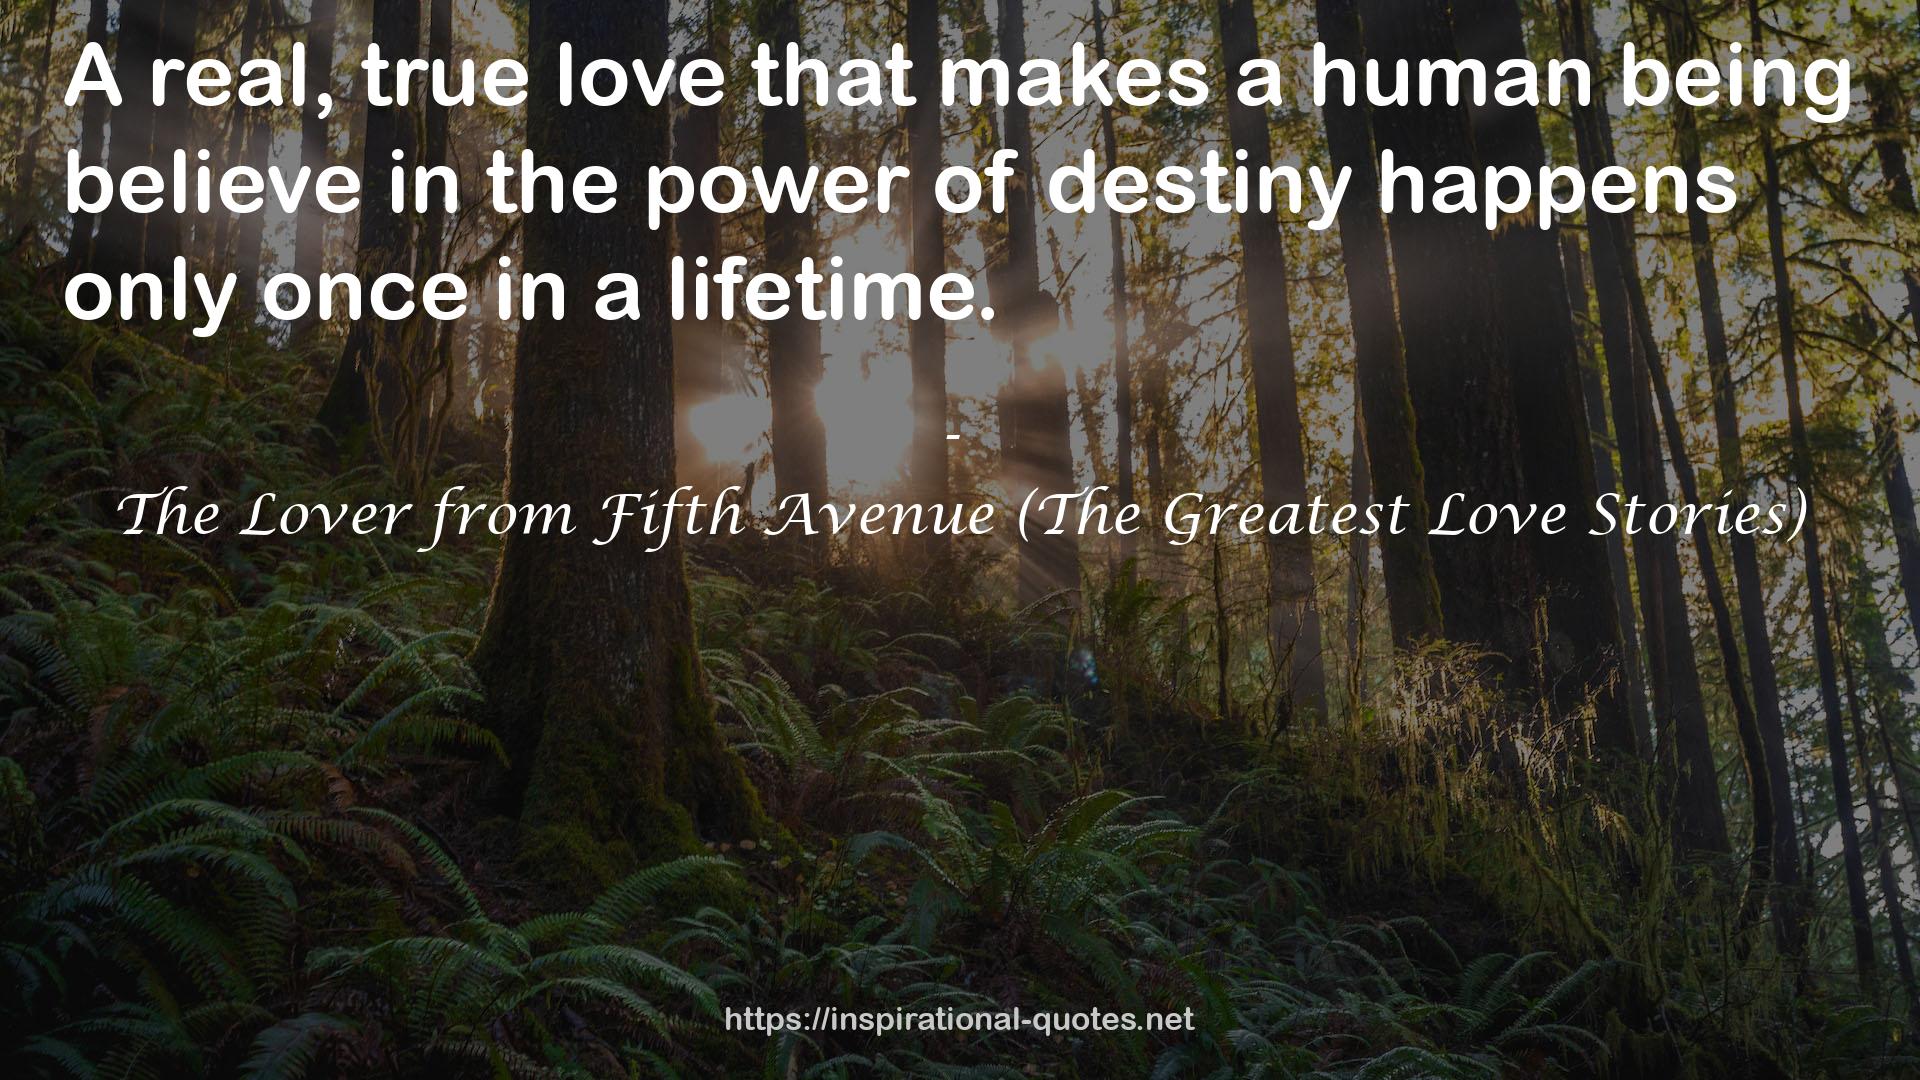 The Lover from Fifth Avenue (The Greatest Love Stories) QUOTES